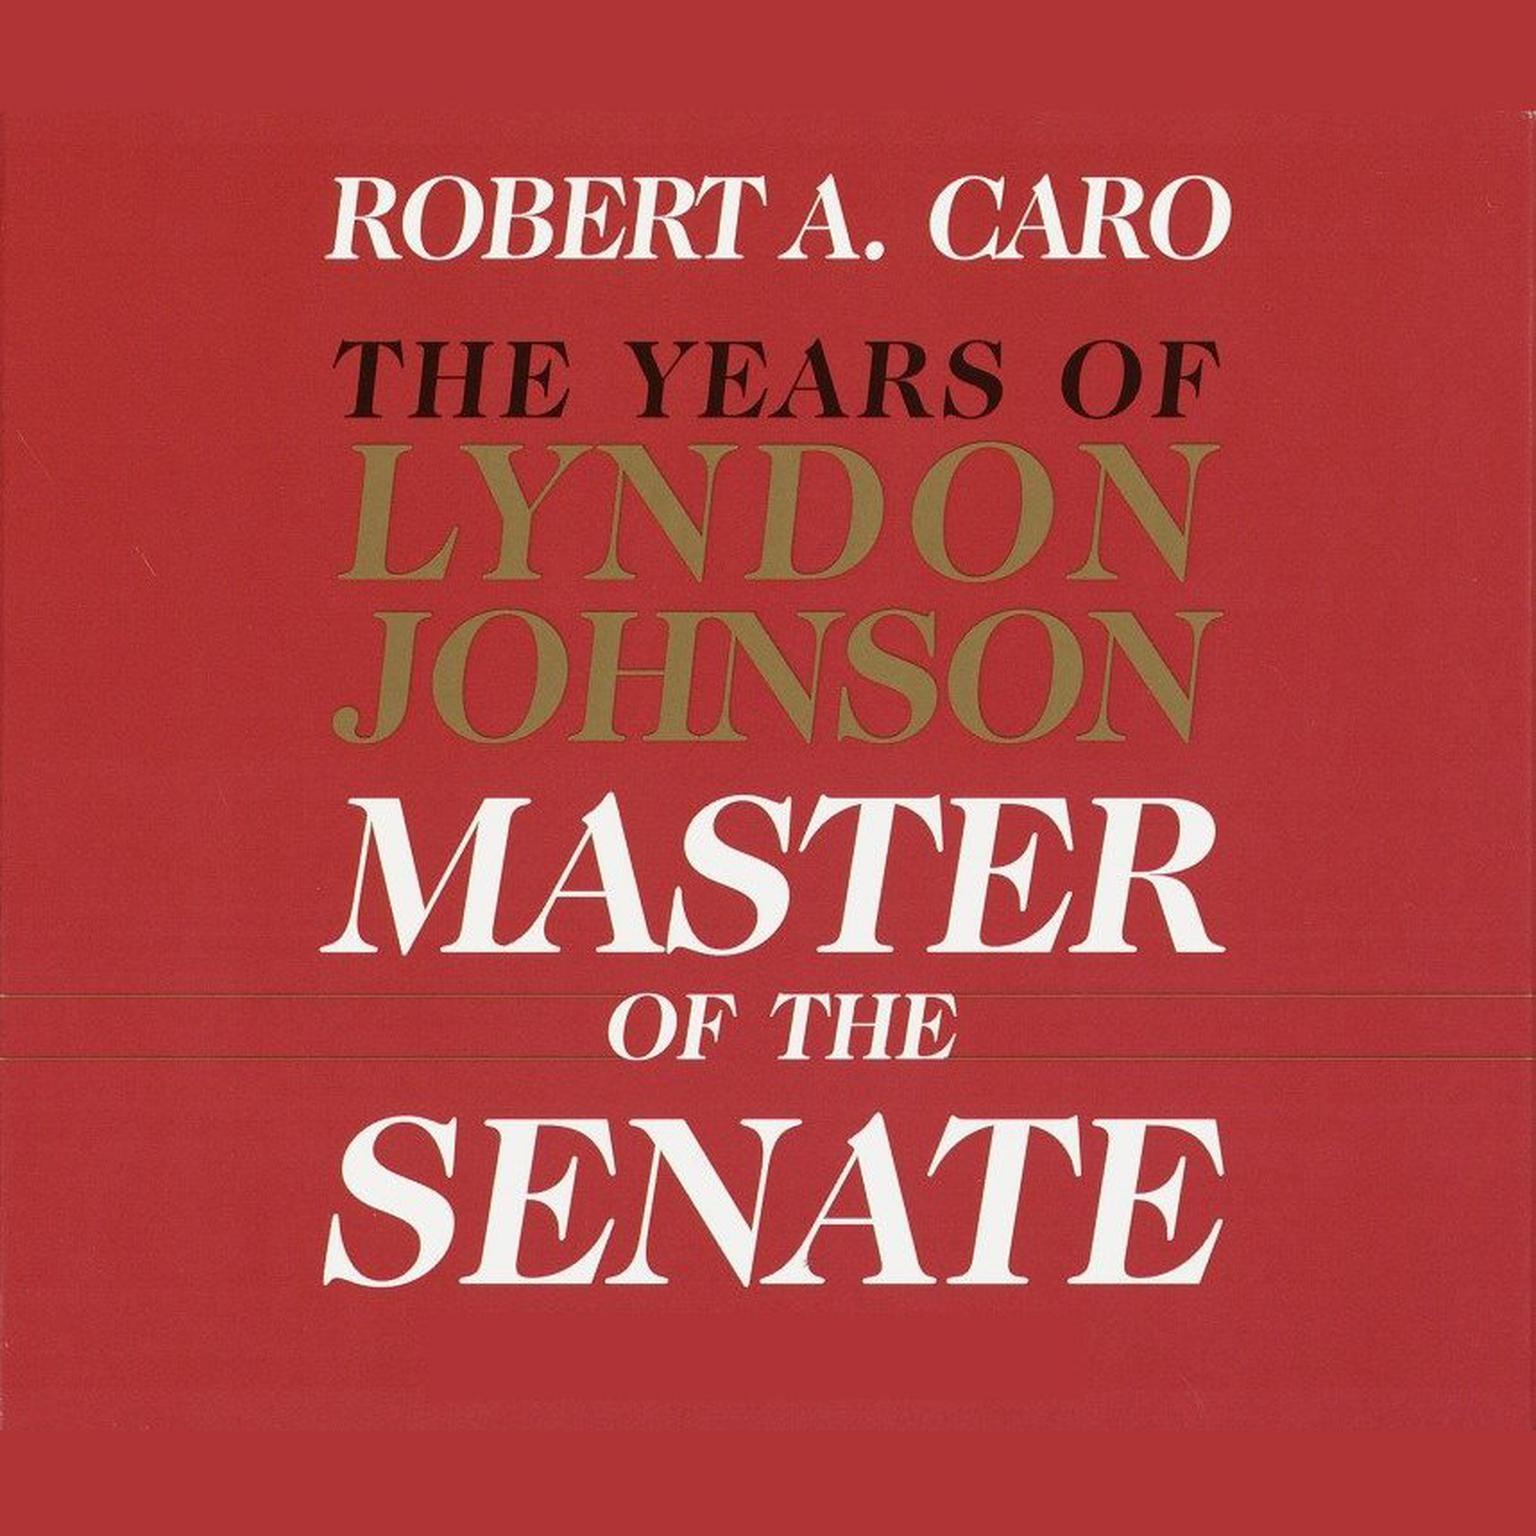 Master of the Senate: The Years of Lyndon Johnson, Volume III (Part 2 of a 3-Part Recording) Audiobook, by Robert A. Caro